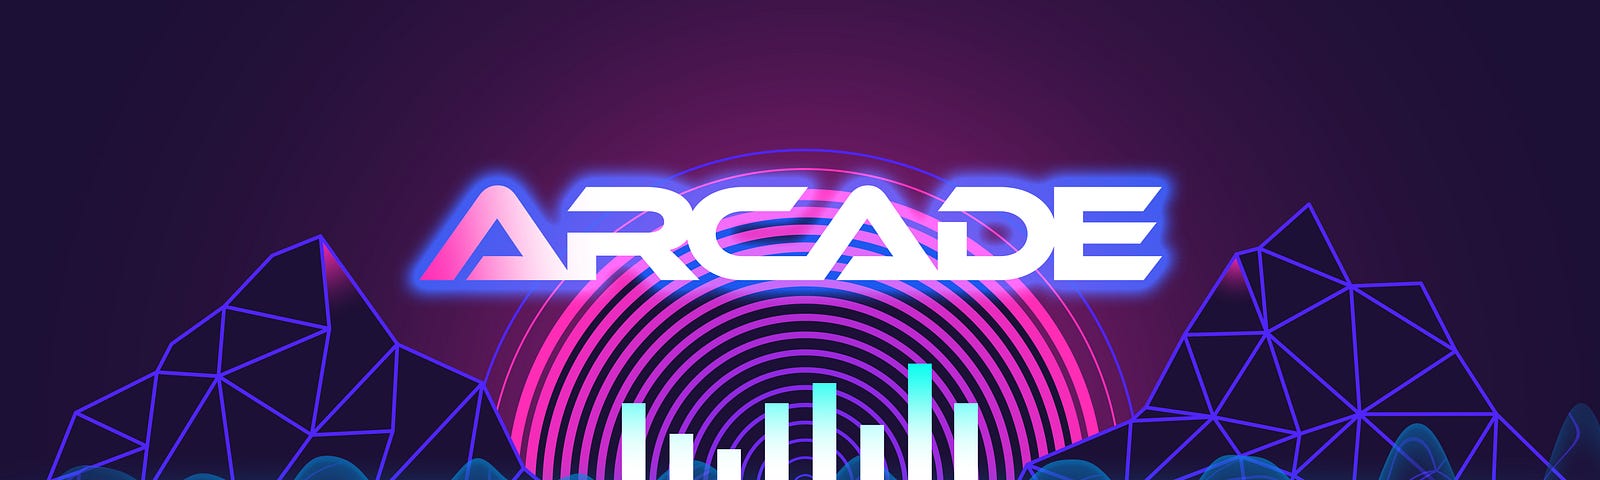 The “Arcade” logo. Arcade is spelled in tron-like font. The letters fade from violet to white. The background is purple with a lighter purple “rainbow” behind the logo. Uneven audio display bars jut up from a neon light blow line at the bottom. On both sides are dark purple video game-y mountains with lighter lines that make the mountains look like they’re made up of triangles.